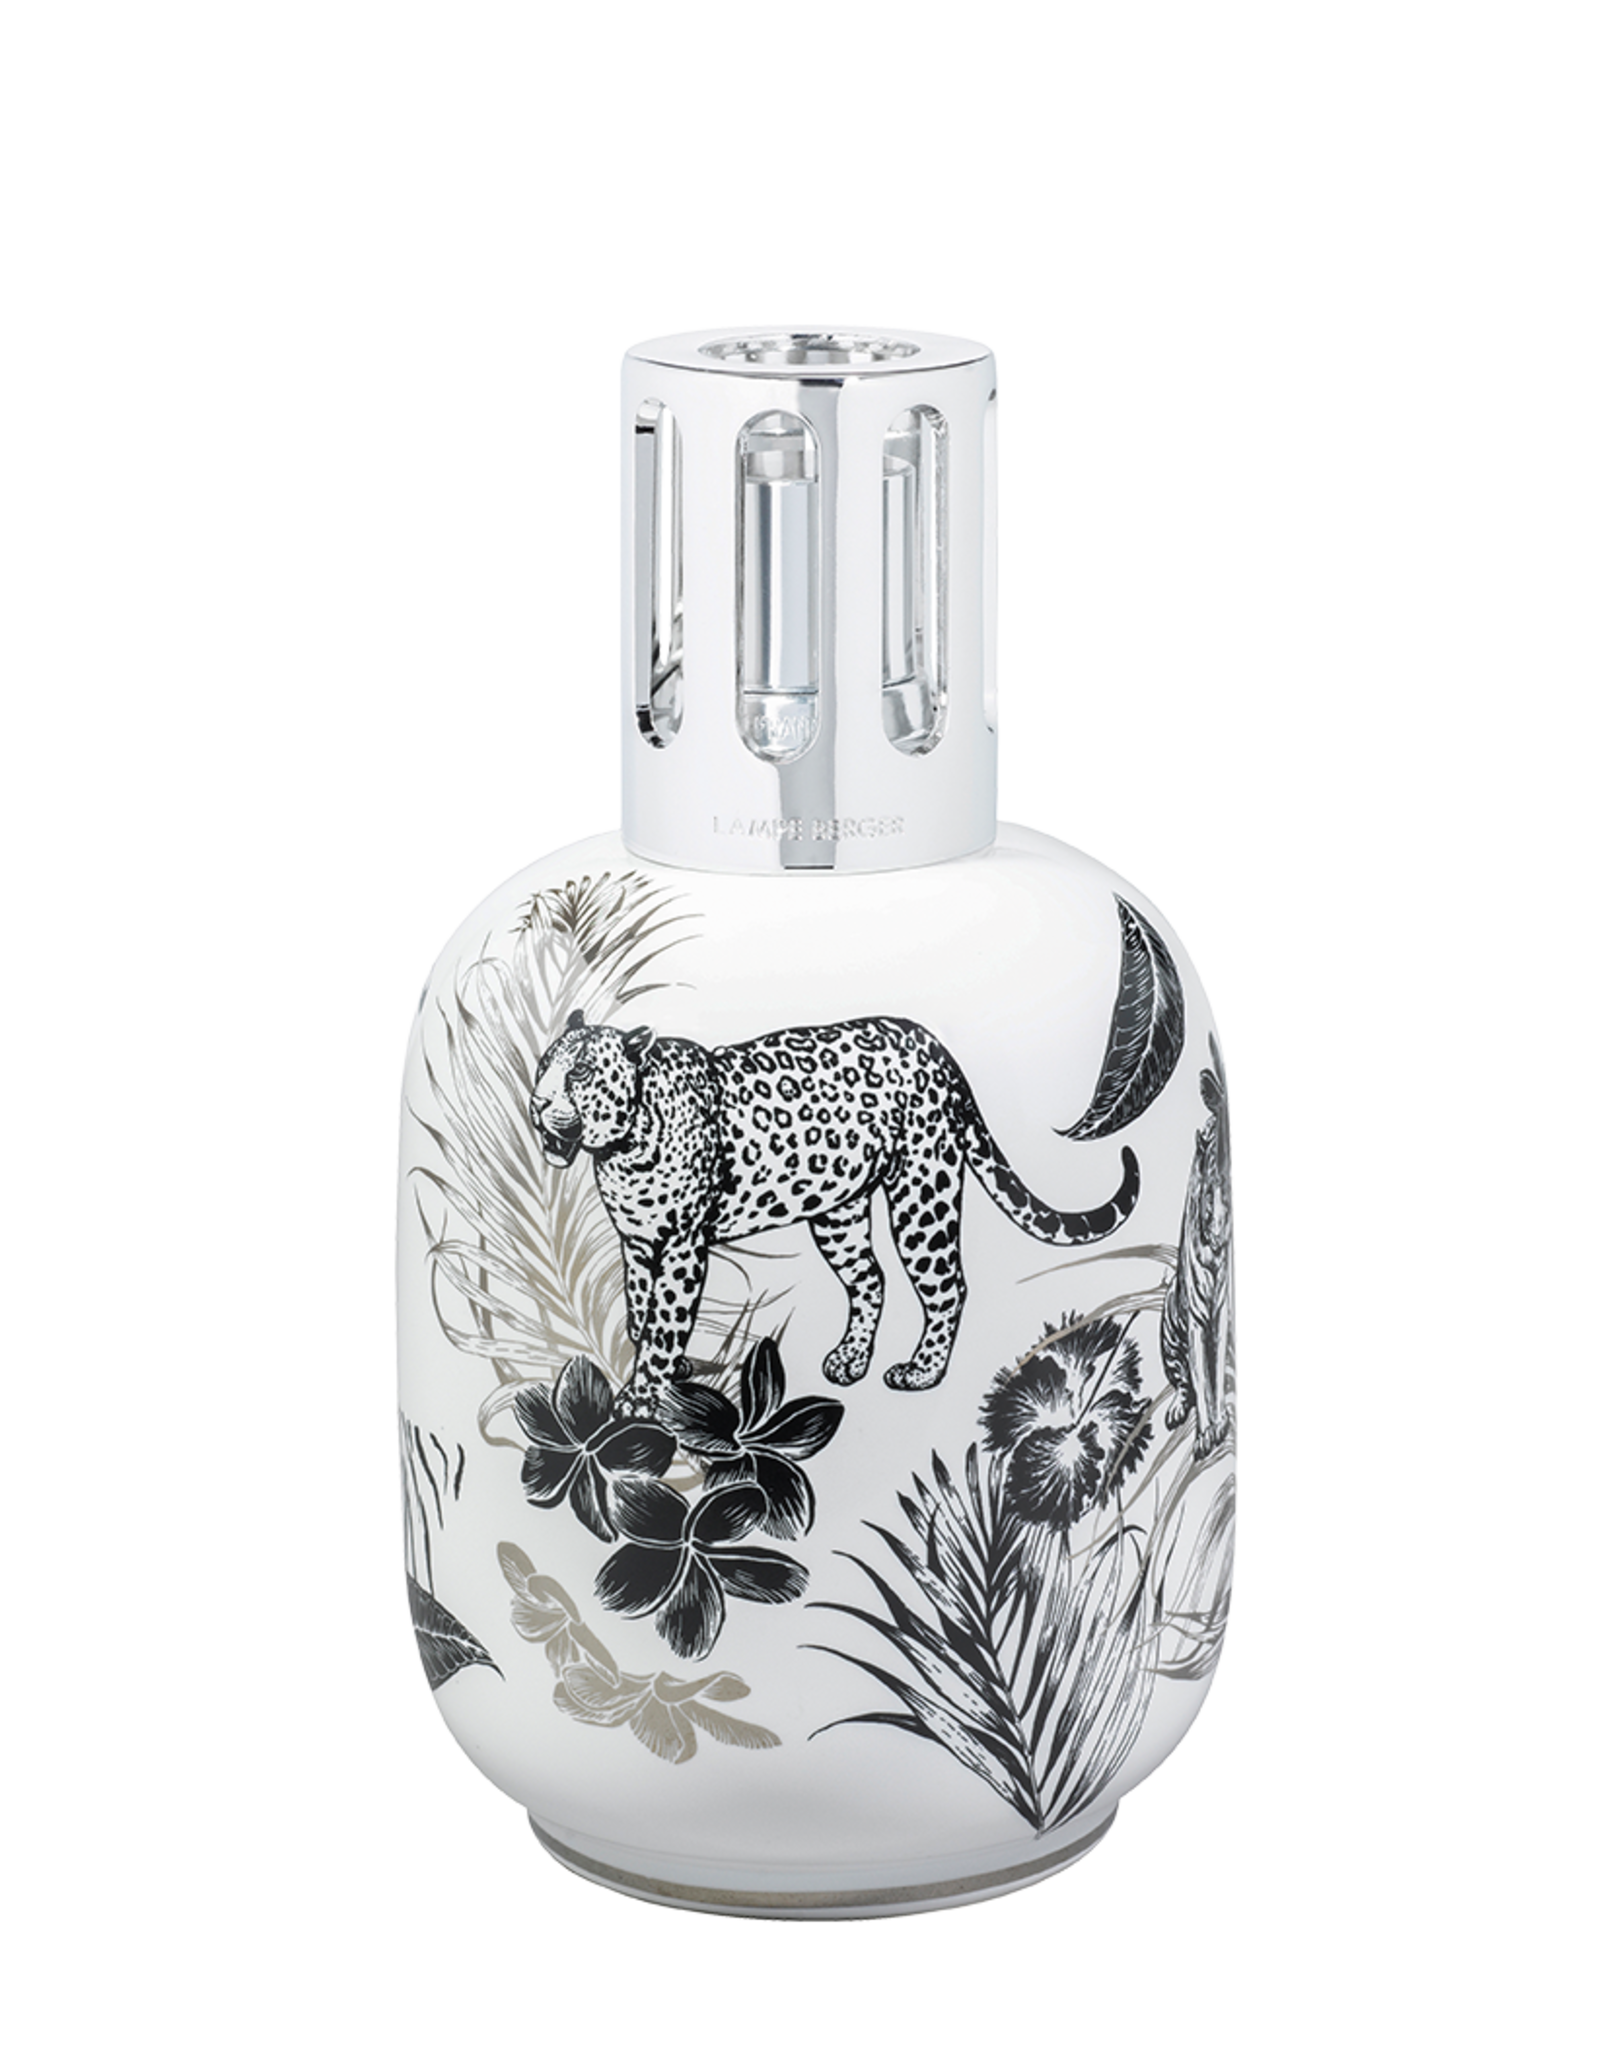 Verknald Laan interview Lampe Berger Jungle Home Fragrance Lamp in White | Maison Berger - Digs N  Gifts